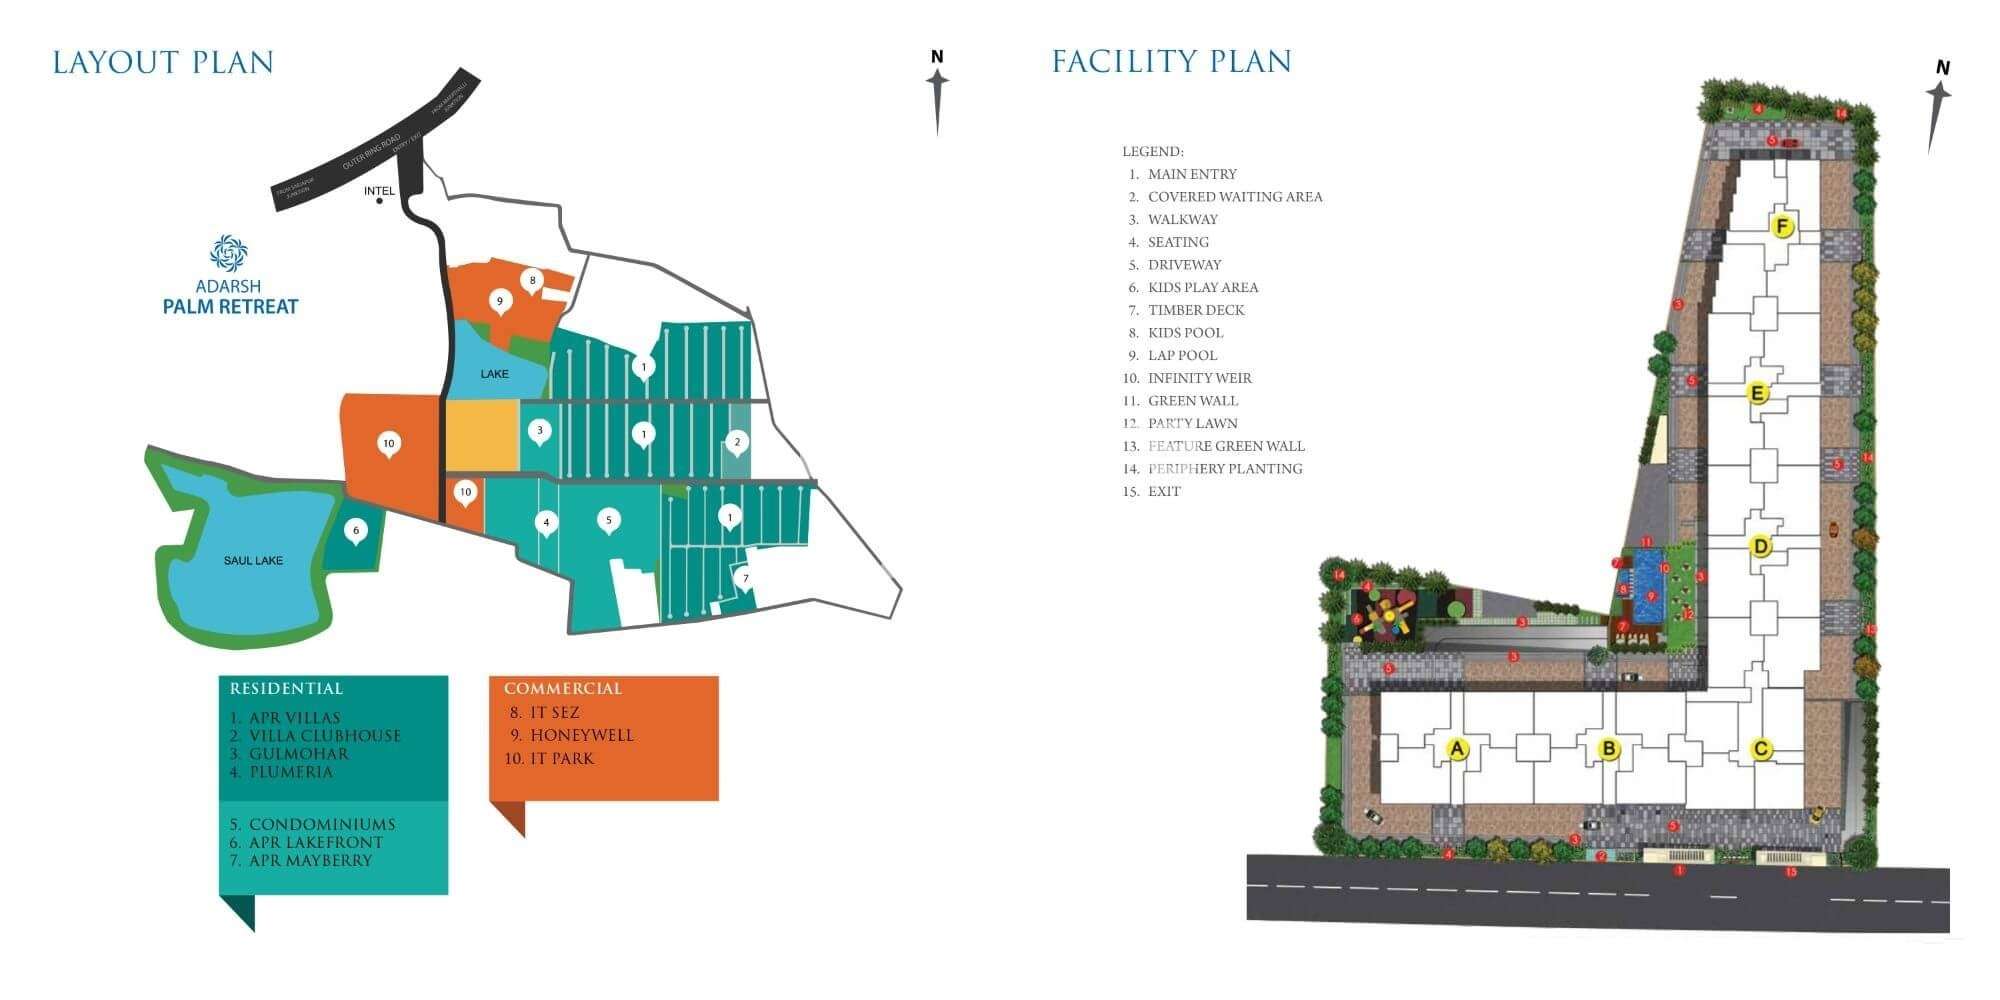 adarsh palm retreat mayberry project master plan image6